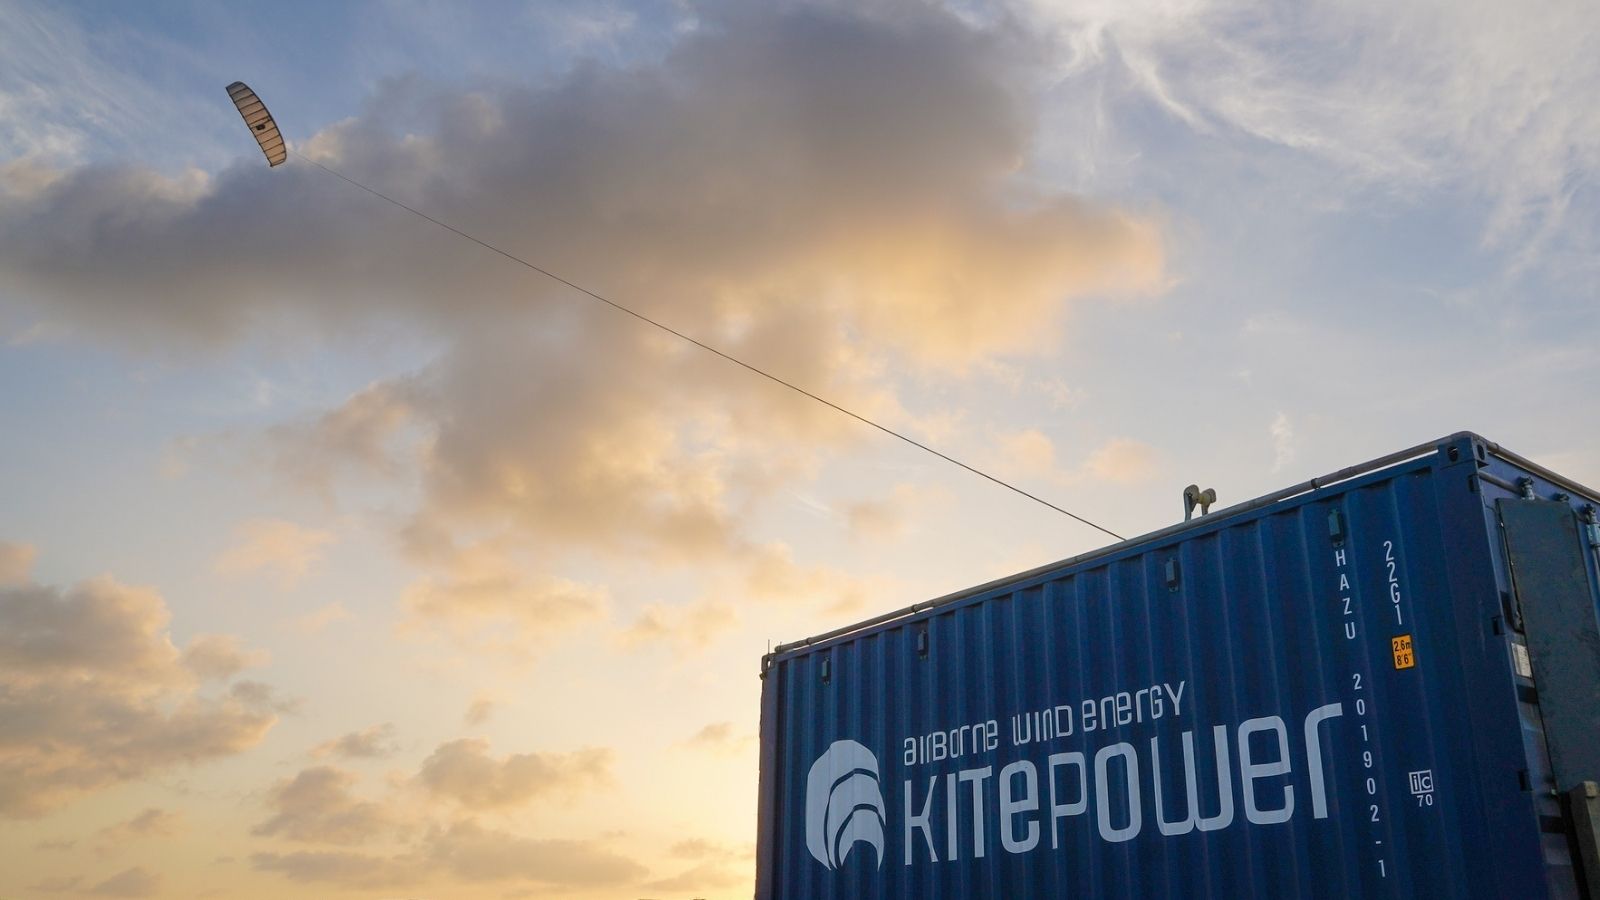 Container with the Kitepower logo linked to a kite in the air.